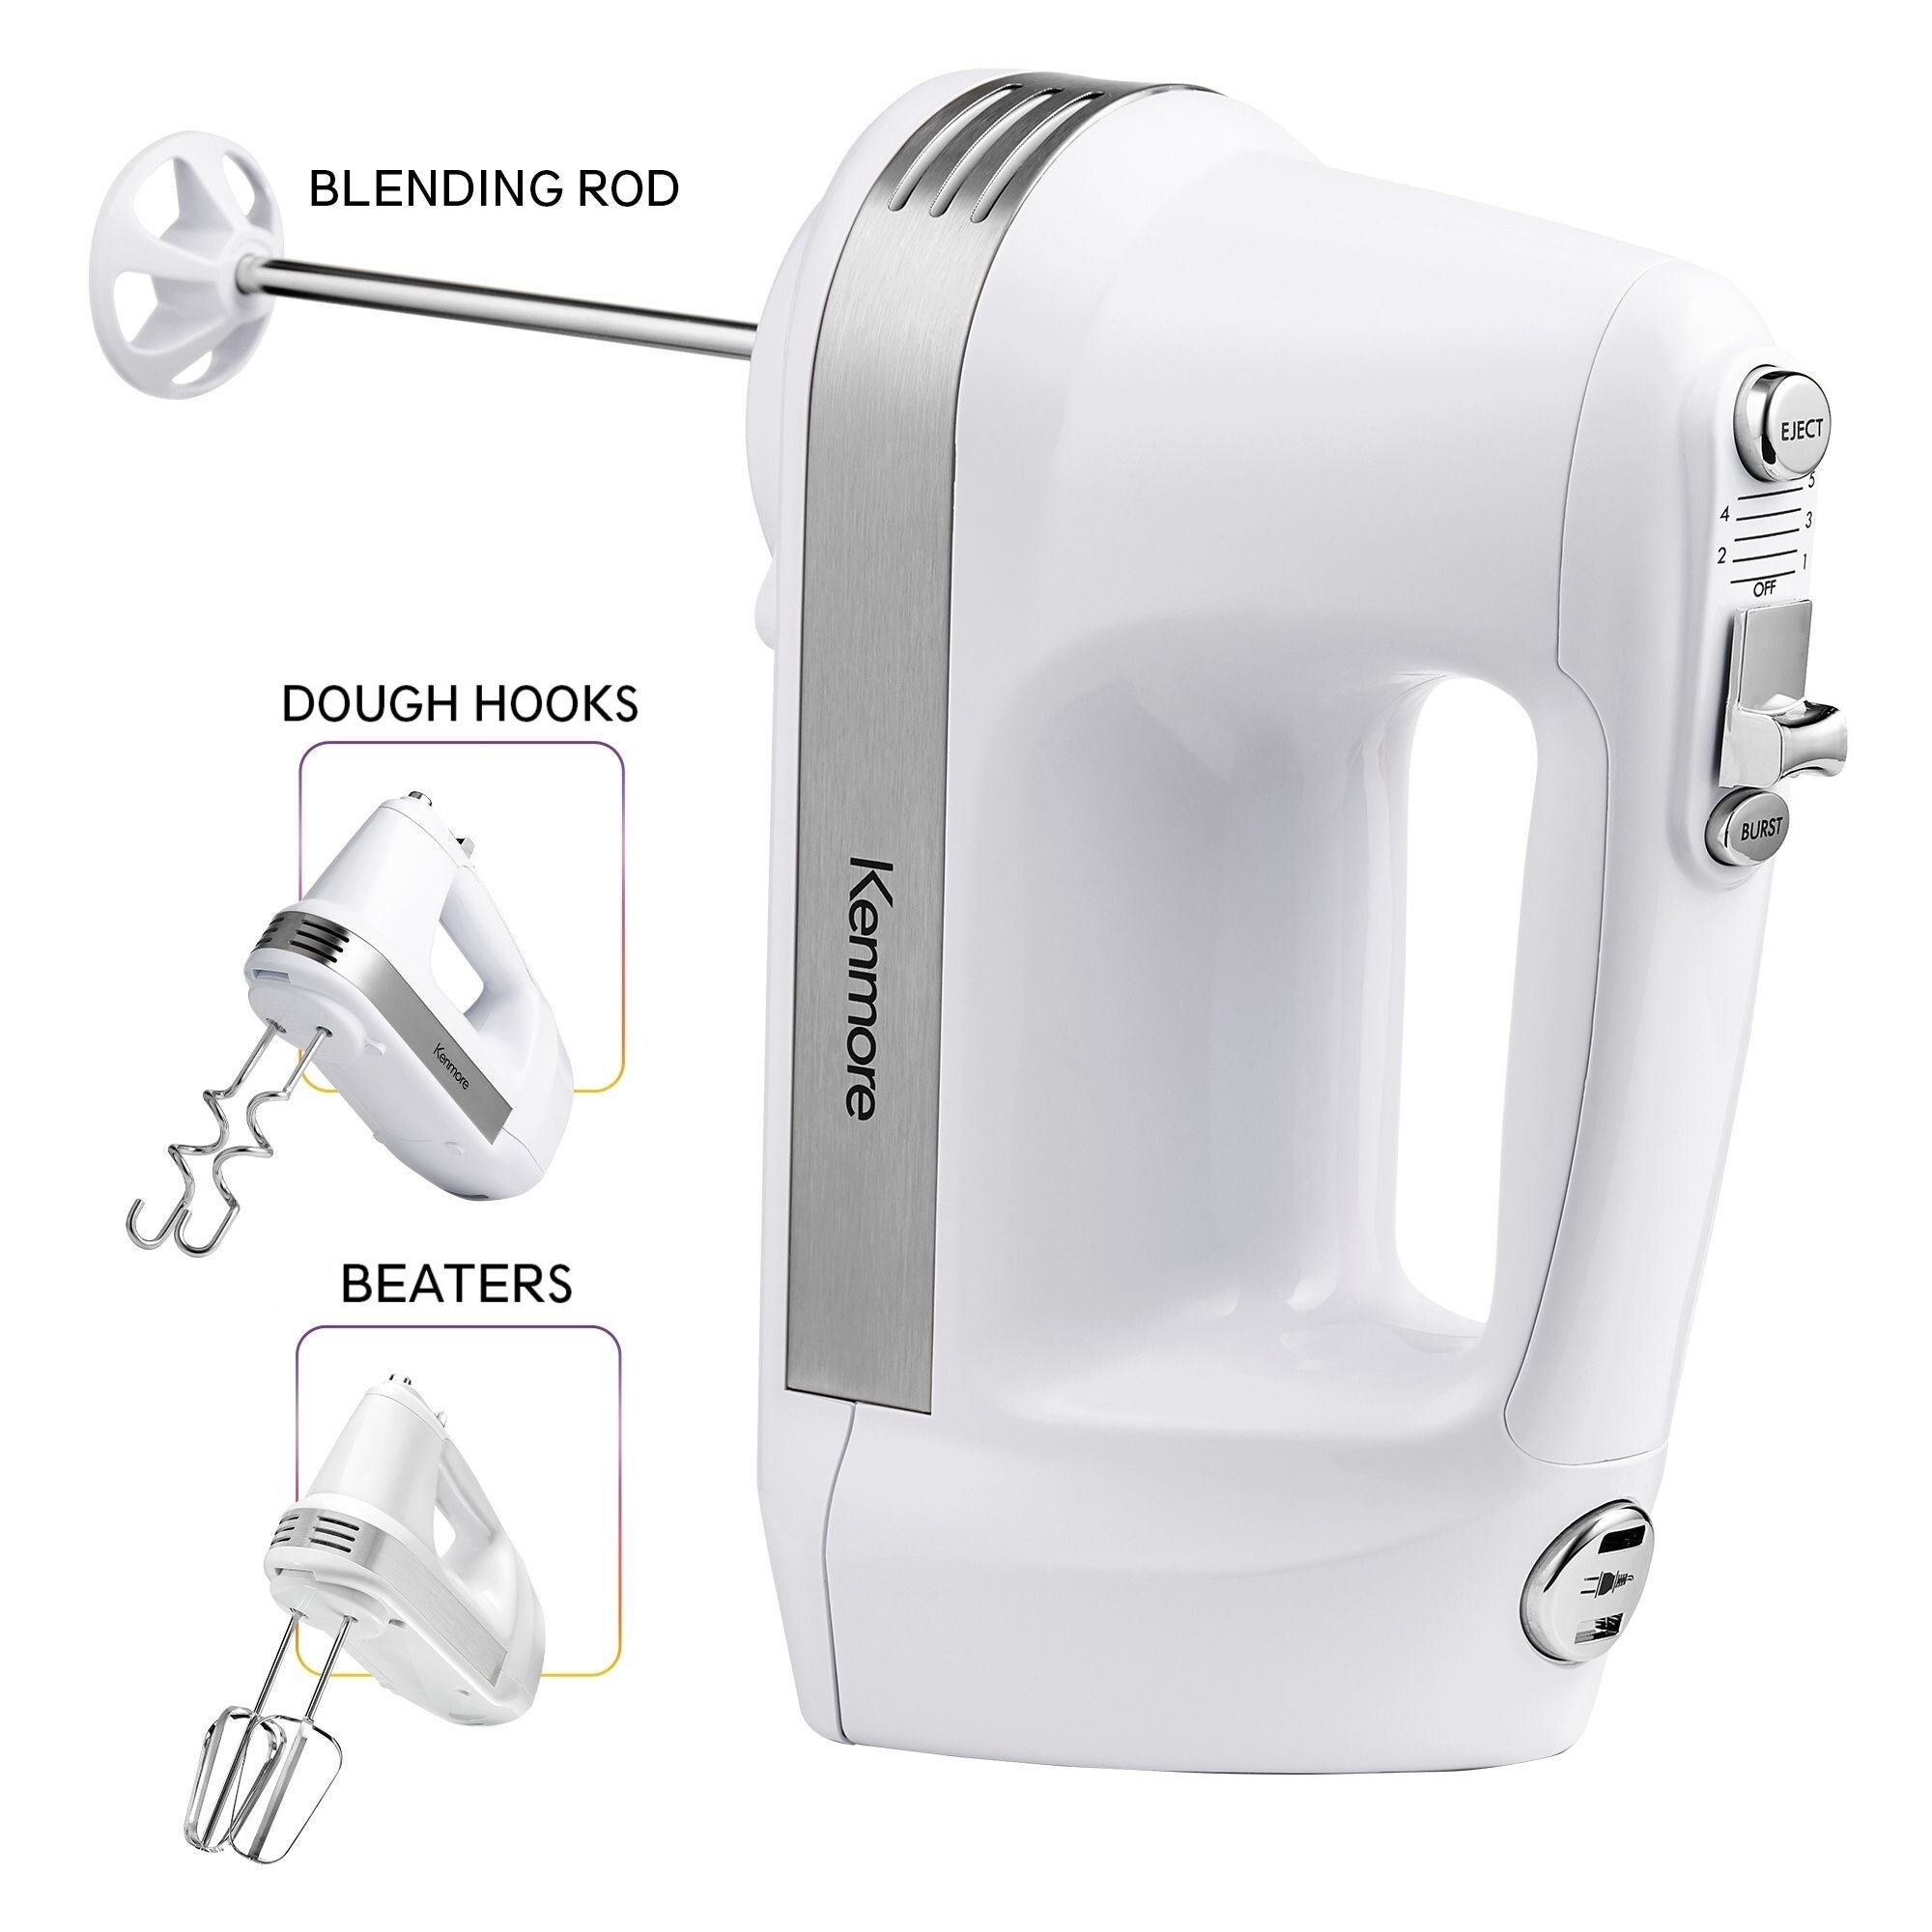 https://ak1.ostkcdn.com/images/products/is/images/direct/6f96a0001afc29e36dce04c62cb742a3f80afb1b/Kenmore-5-Speed-Hand-Mixer---Beater---Blender%2C-White%2C-250W-Electric-Mixer-with-Dishwasher-Safe-Beaters%2C-Dough-Hooks.jpg